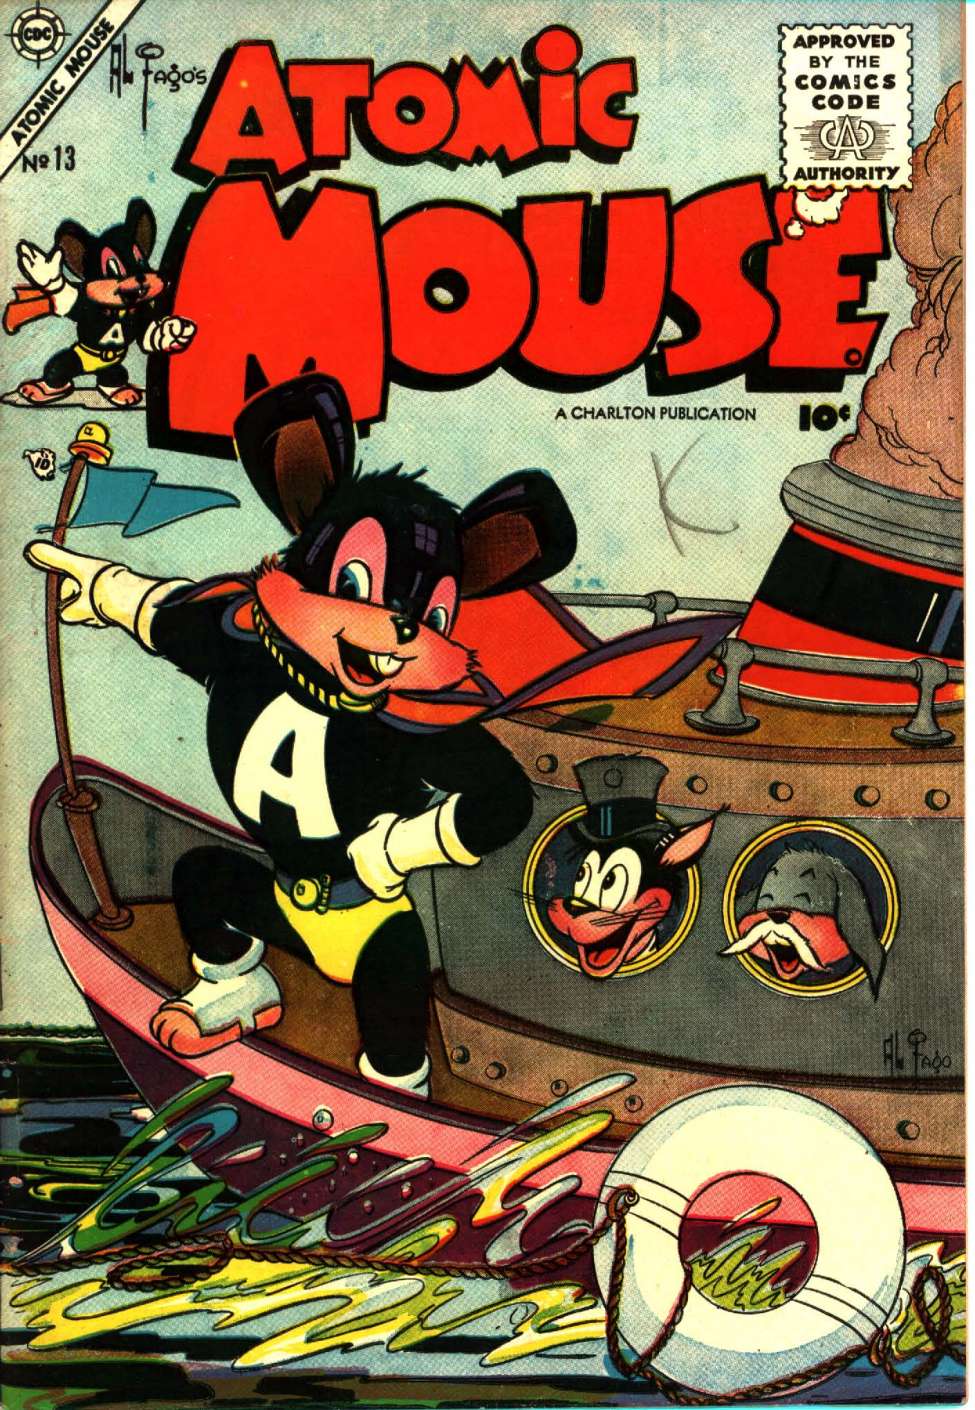 Book Cover For Atomic Mouse 13